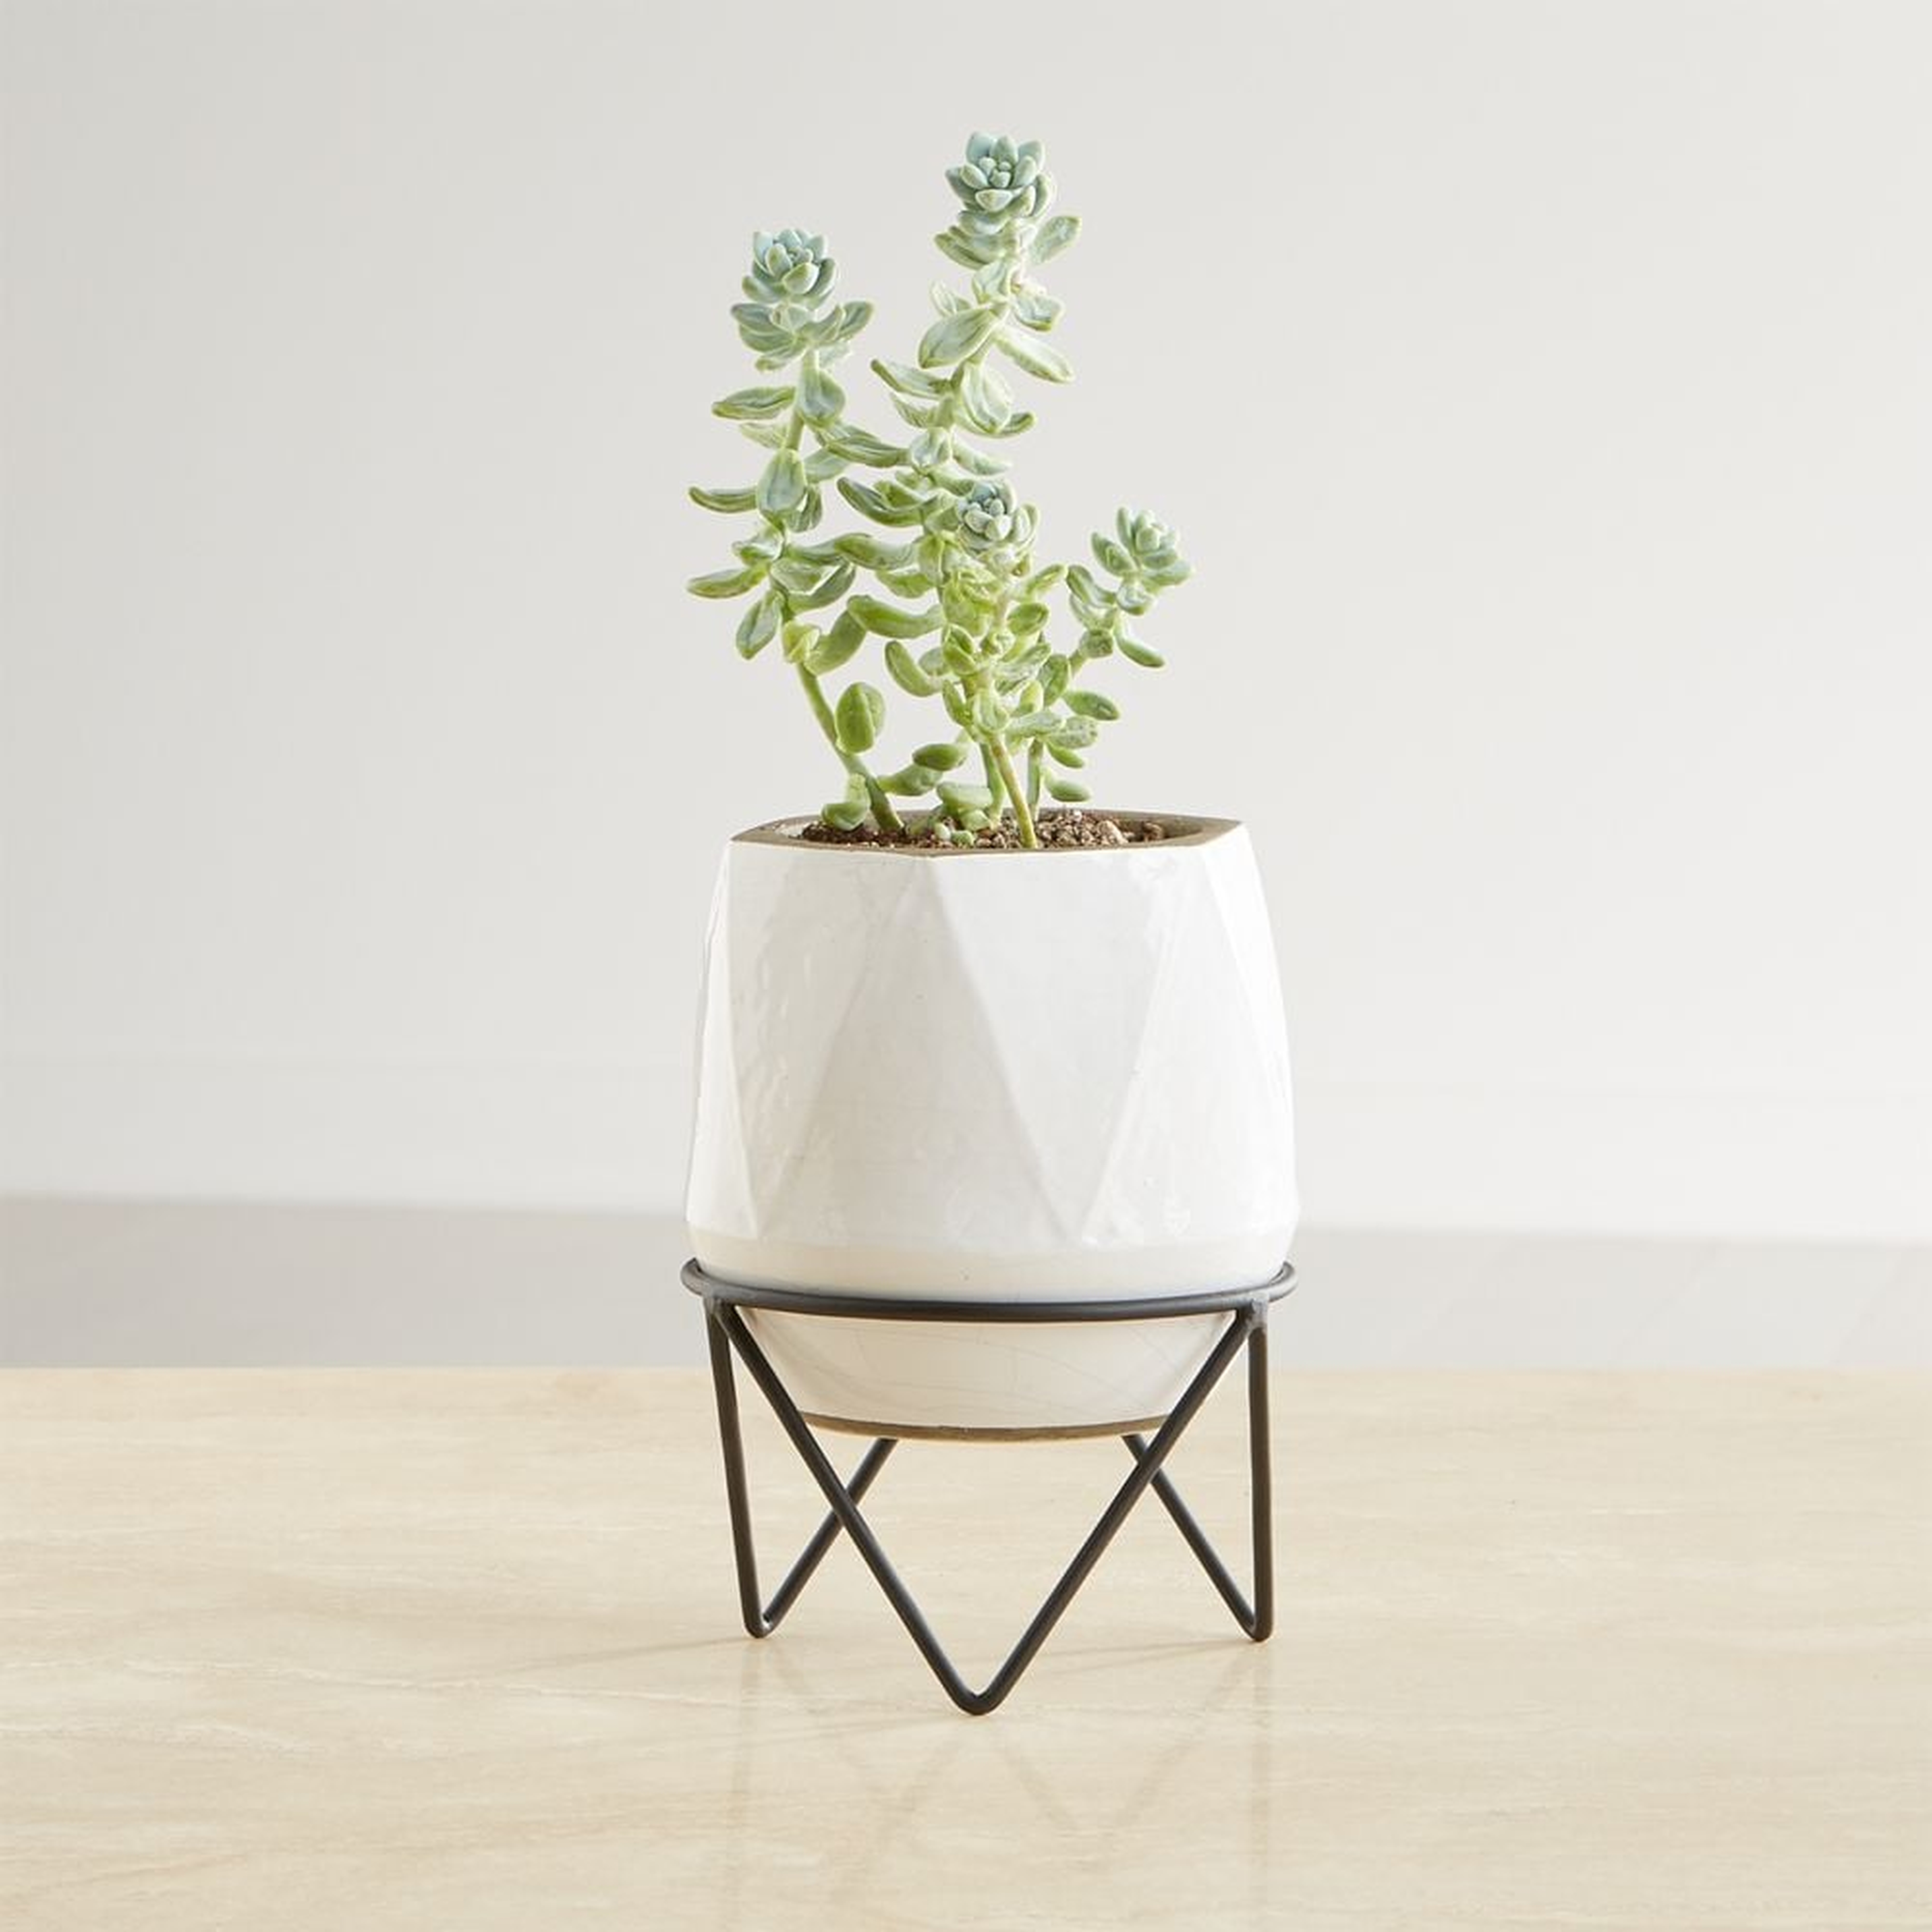 Aaro Small Geo Planter with Stand - Crate and Barrel